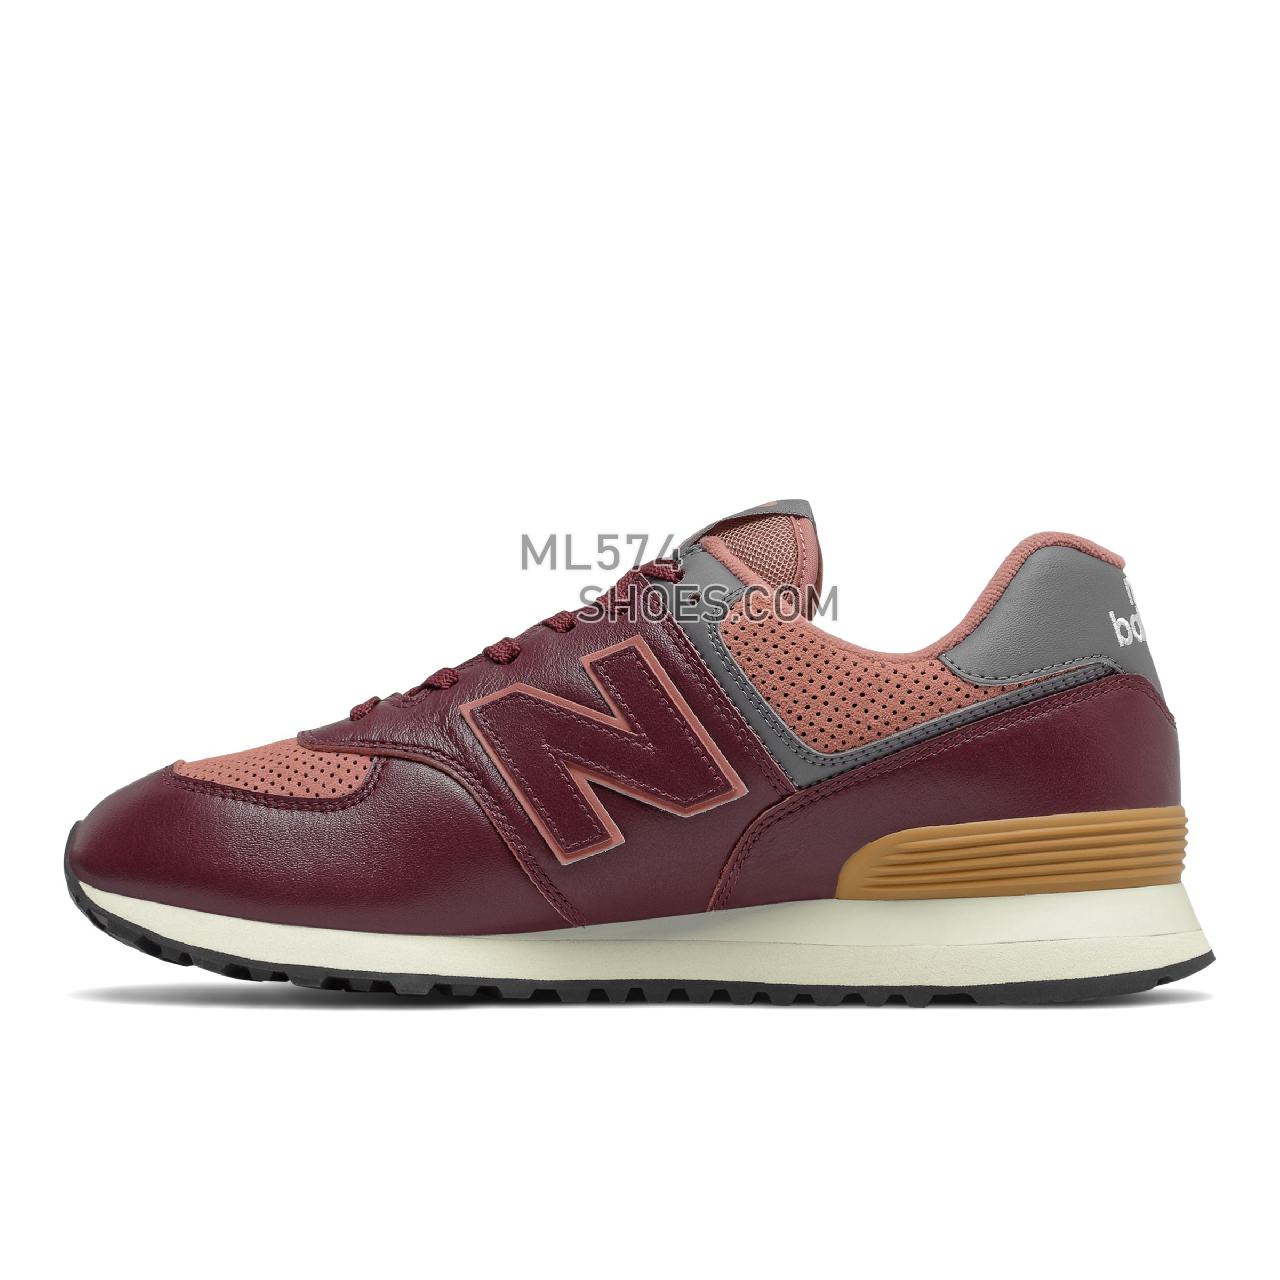 New Balance 574v2 - Men's Classic Sneakers - Burgundy with Castlerock - ML574PX2